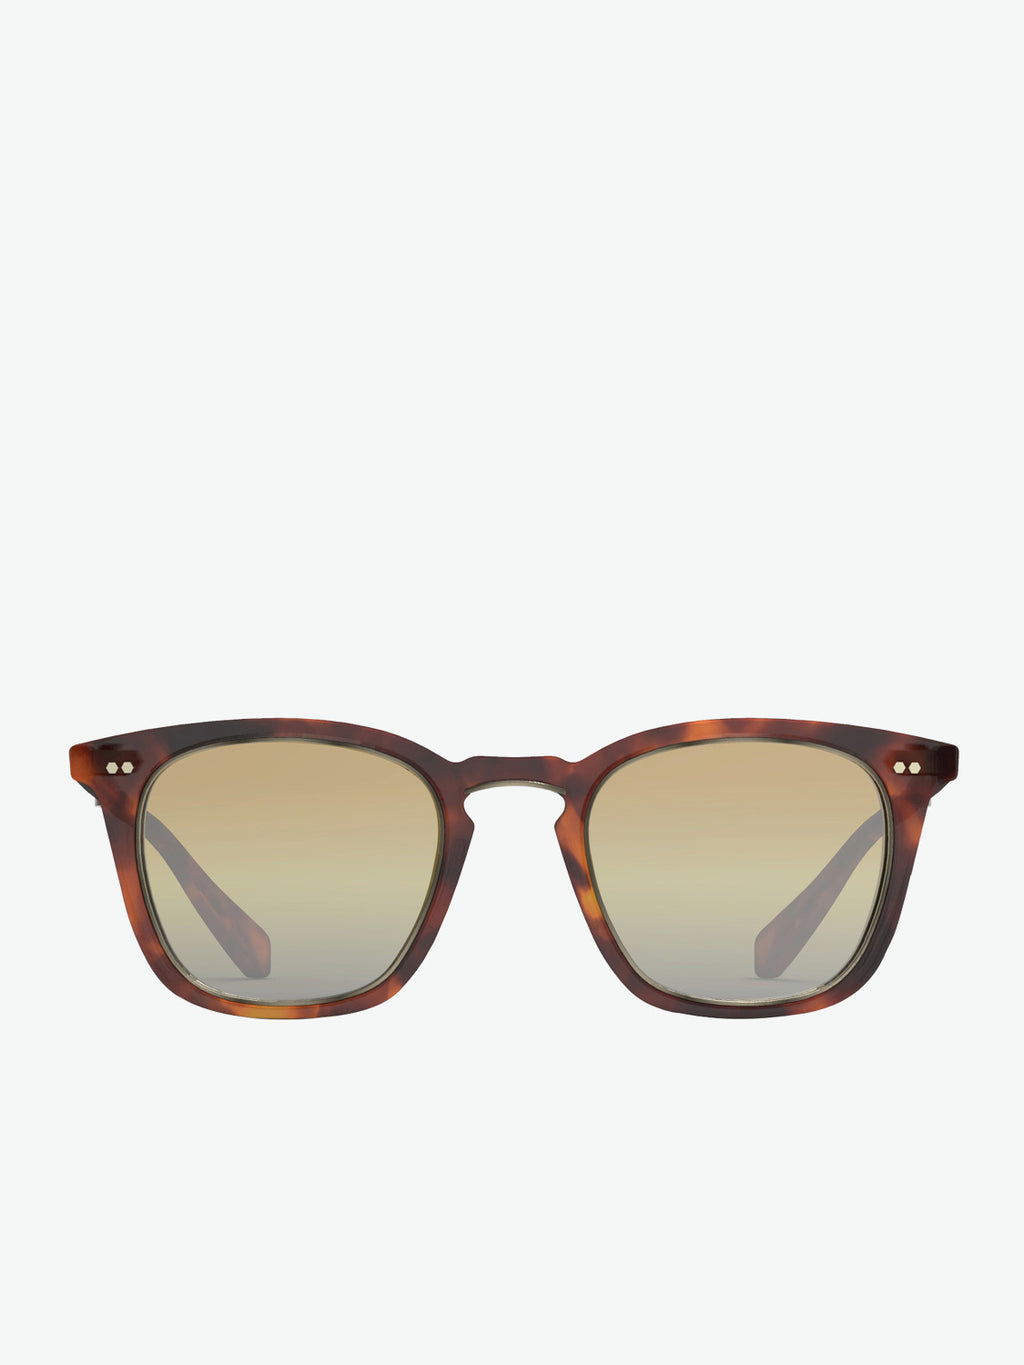 Mr. Leight | Men's Sunglasses | The Project Garments